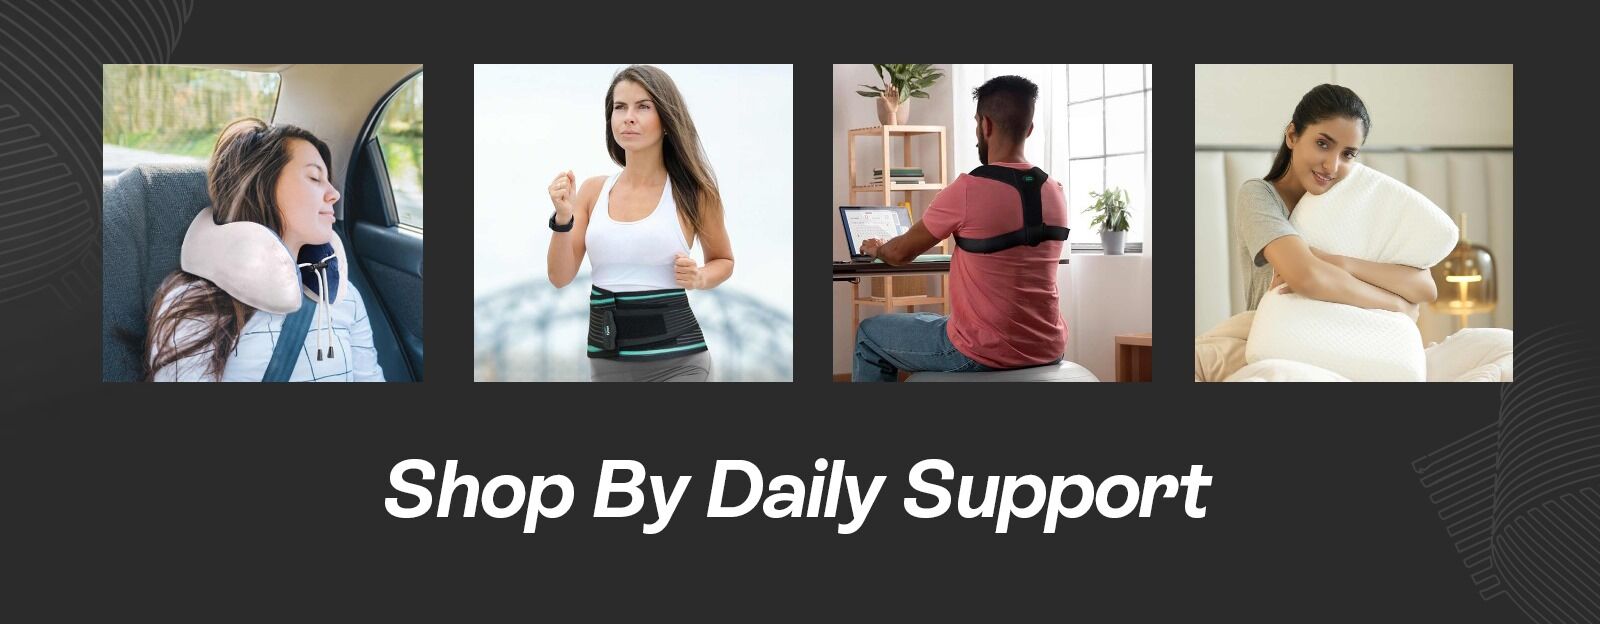 Shop By Daily Support